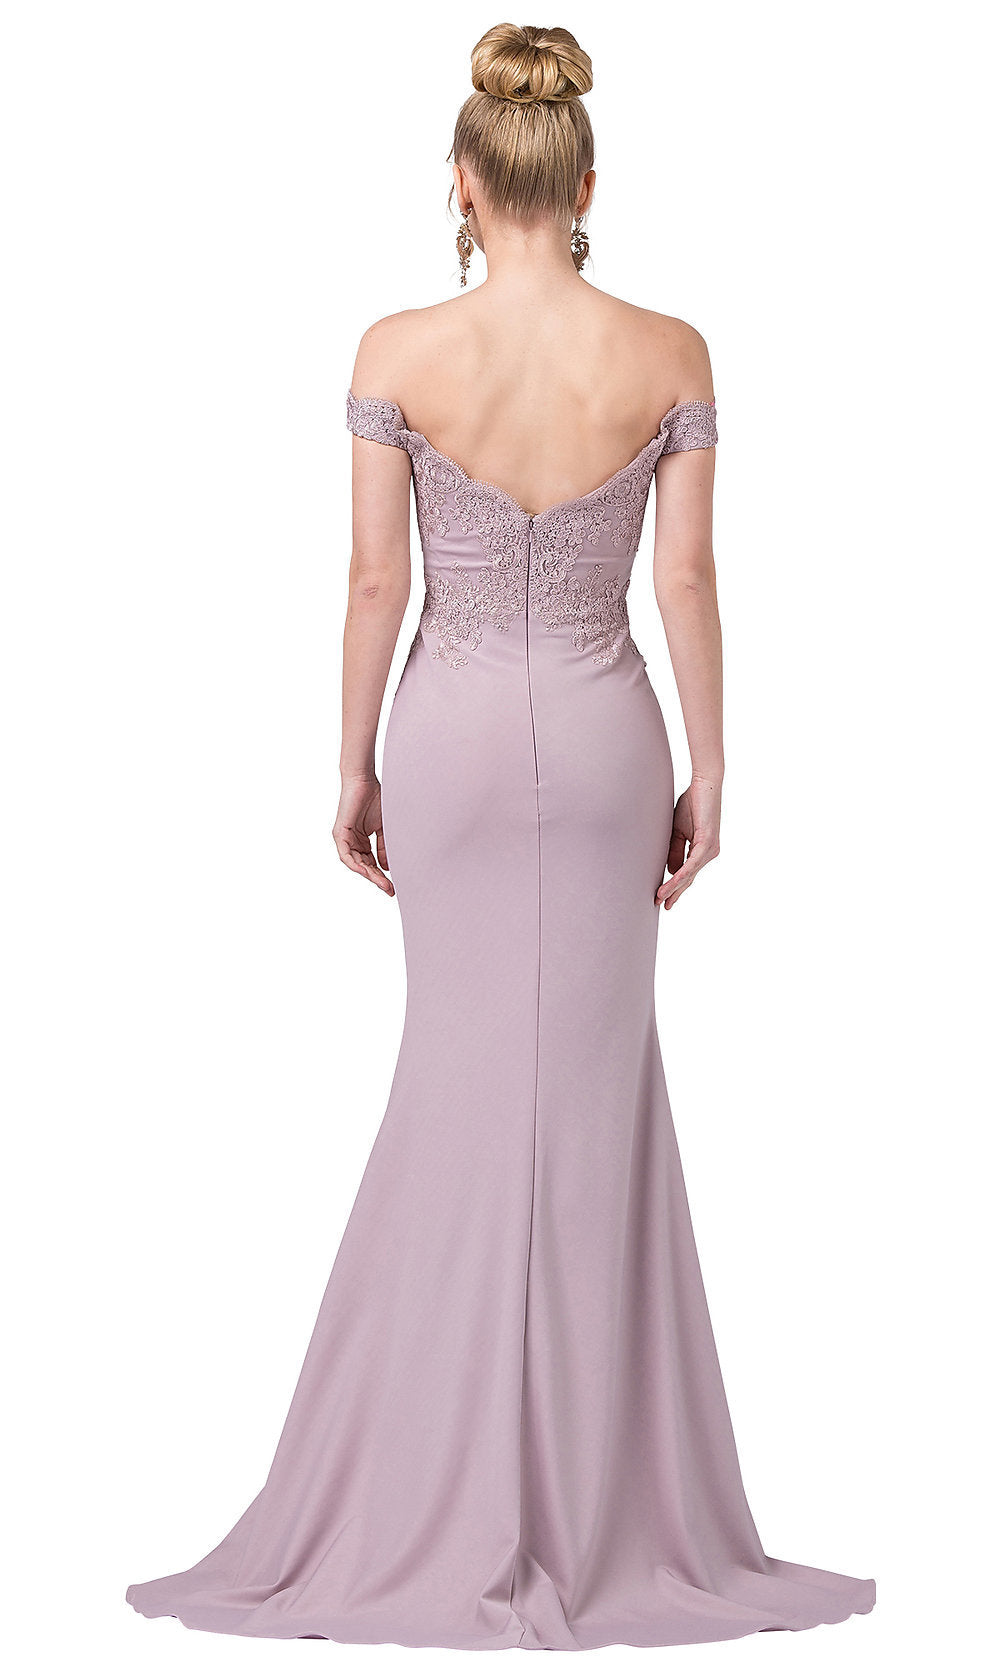  Embroidered Off-the-Shoulder Sweetheart Prom Gown